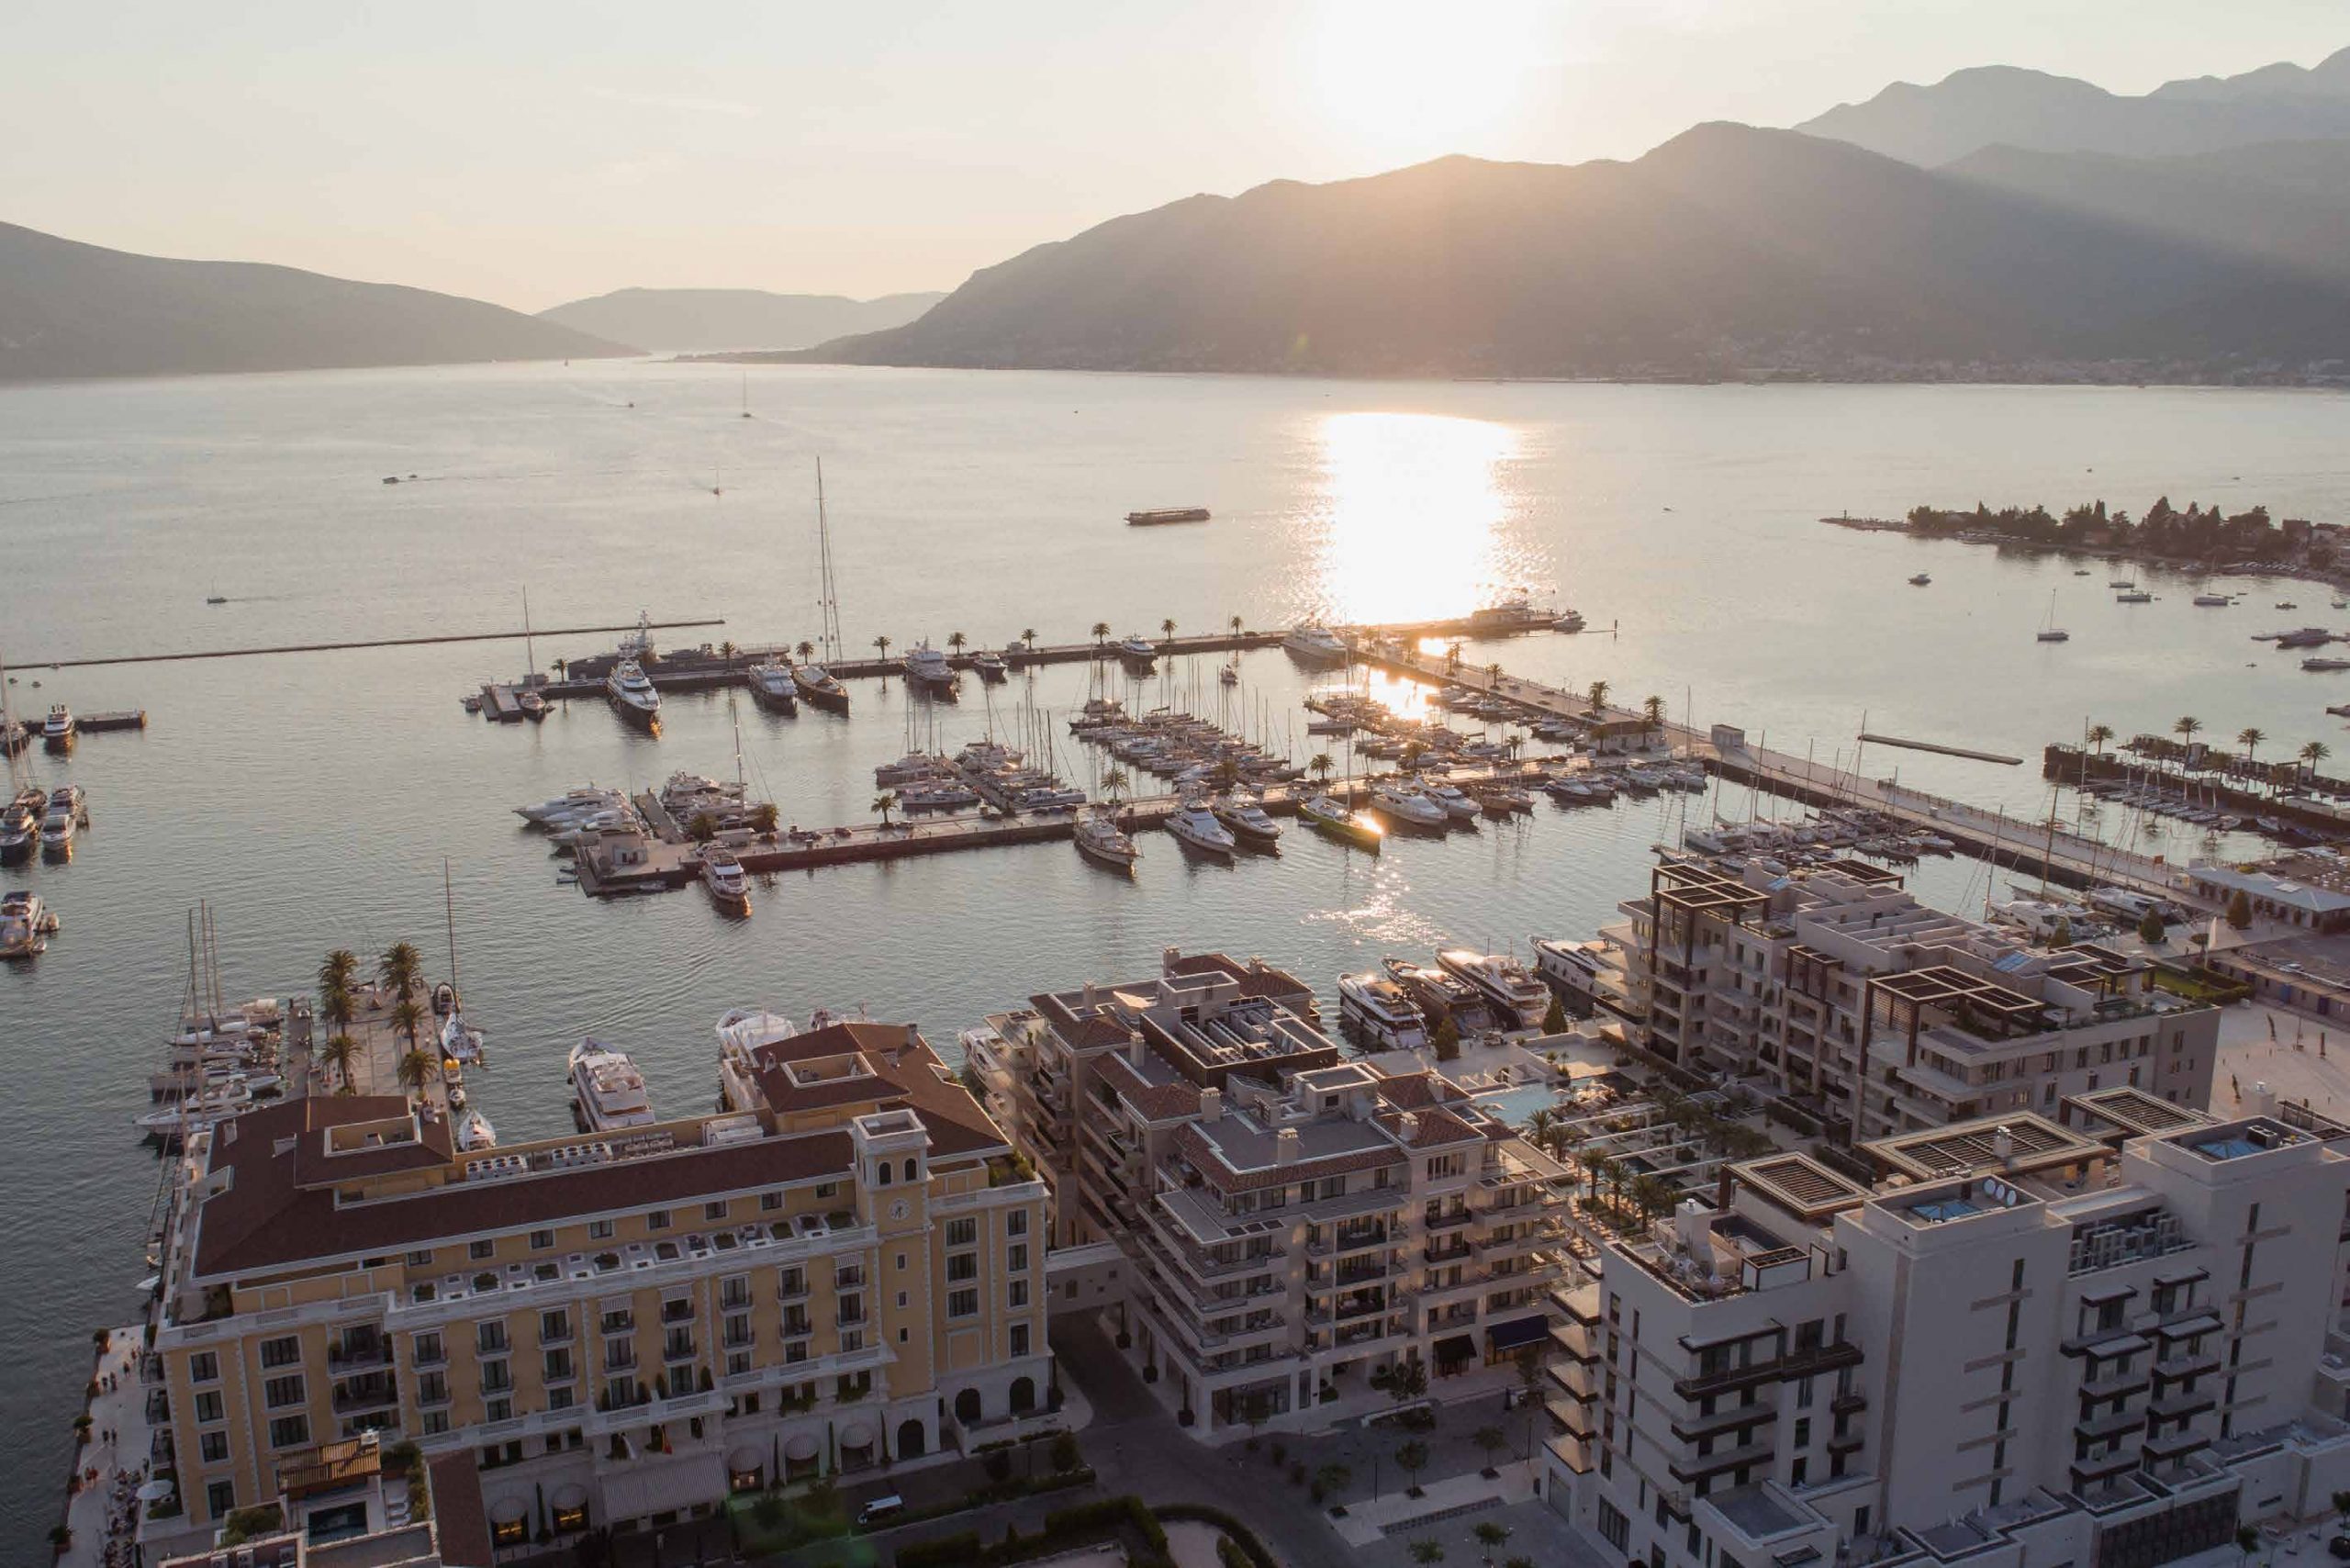 Porto Montenegro, now officially the World’s Best Superyacht Marina, catering to the global jet set